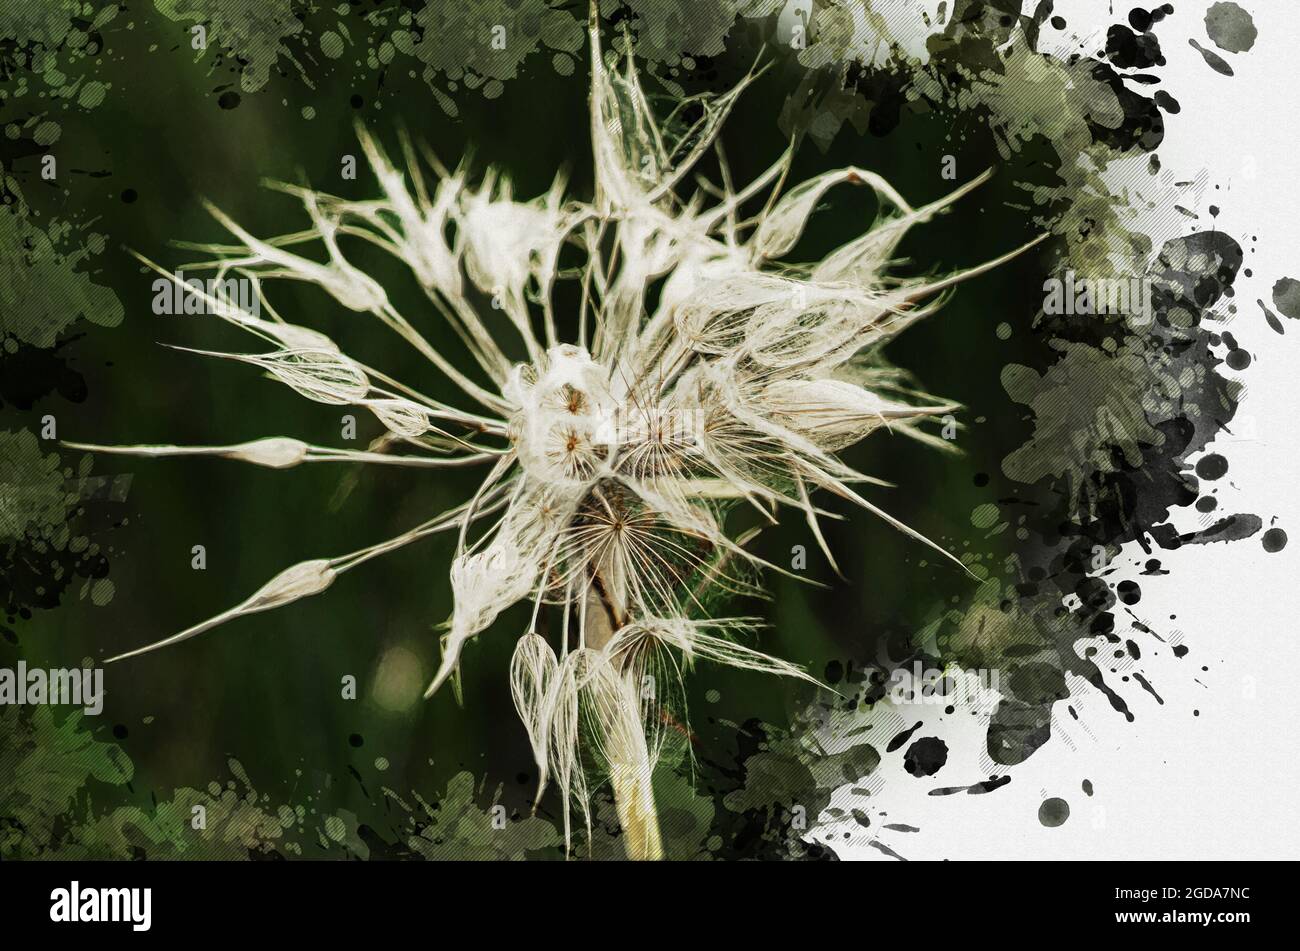 Close-up of goatweed or Tragopogon seeds. Wet blowball of meadow salsify after rain. Digital watercolor painting. Modern Art Stock Photo